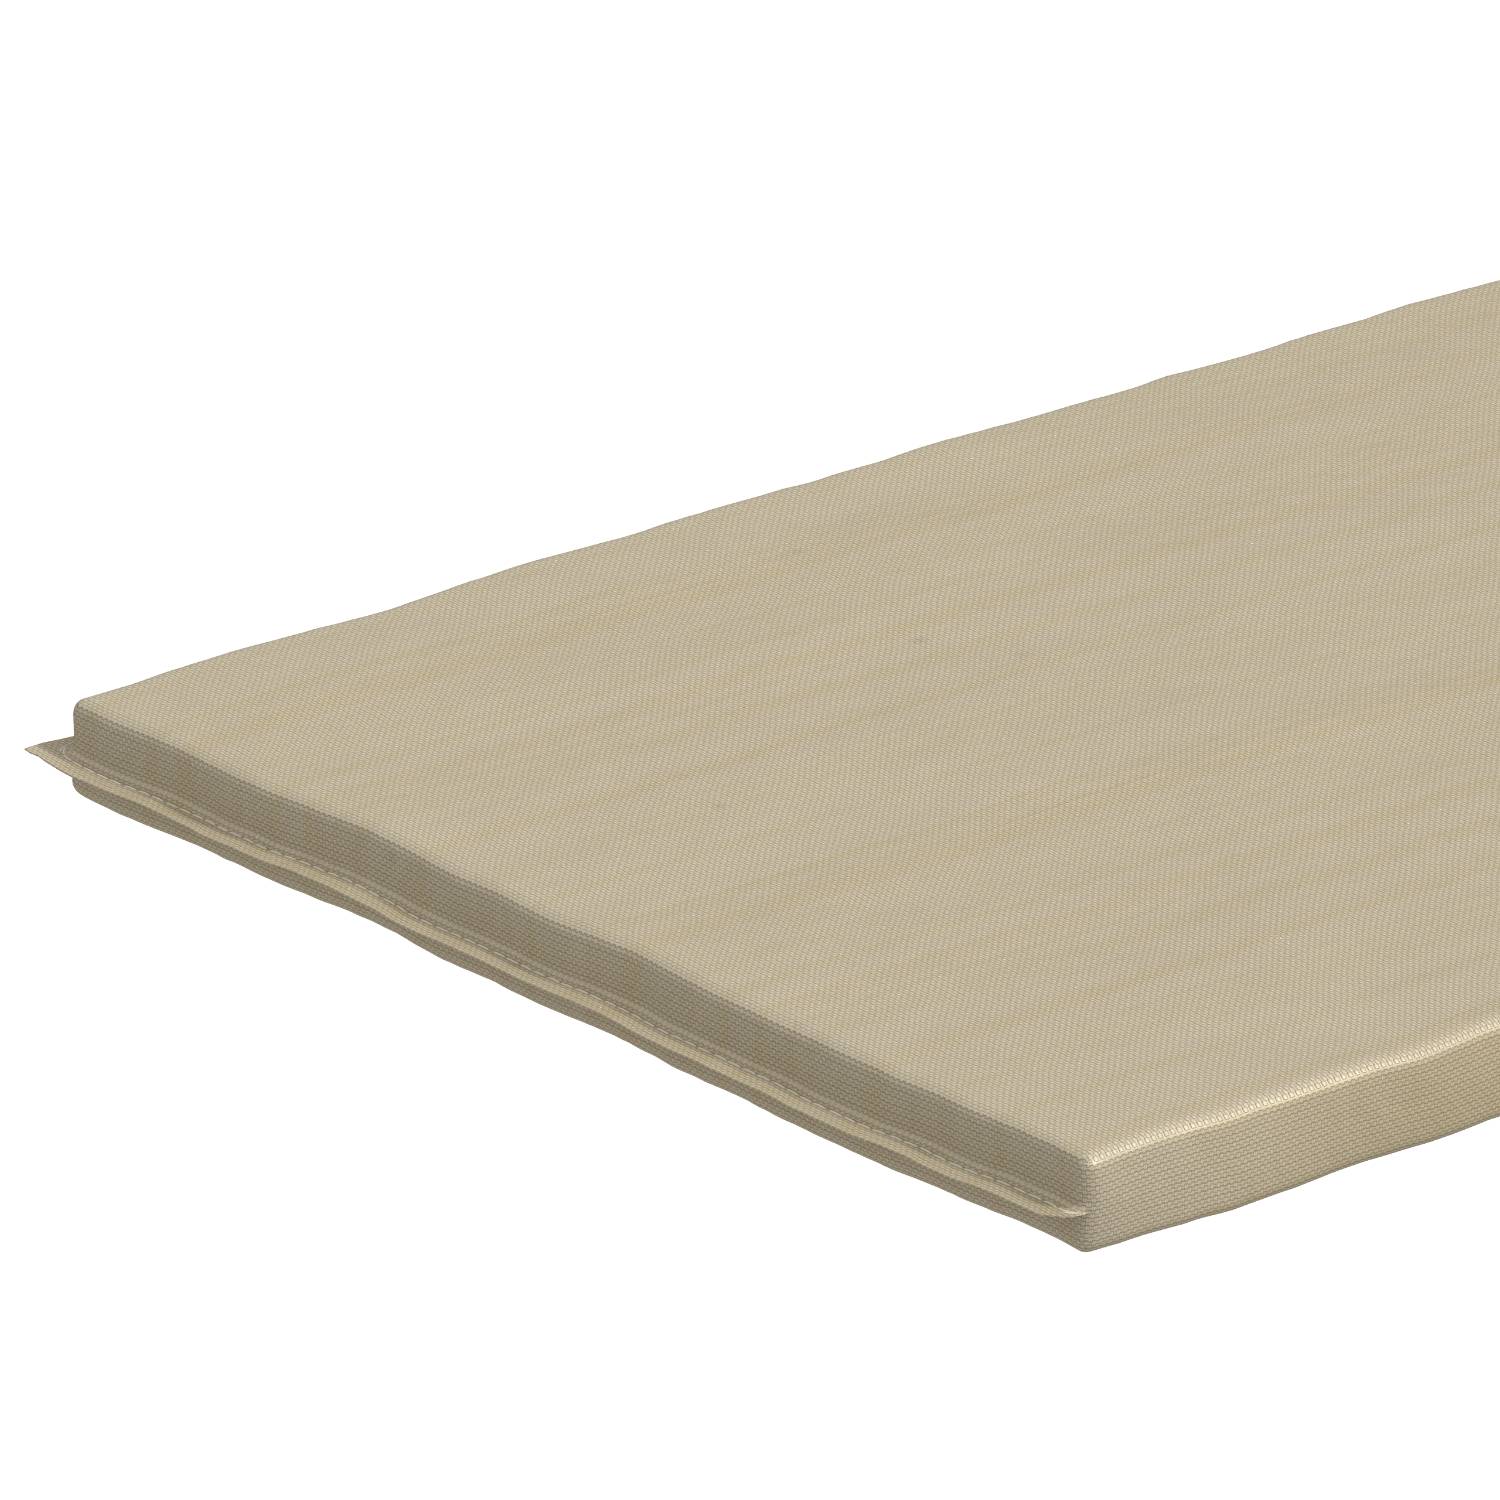 Kingspan AlphaCore Pad - Soffit - Thermal Insulation Board